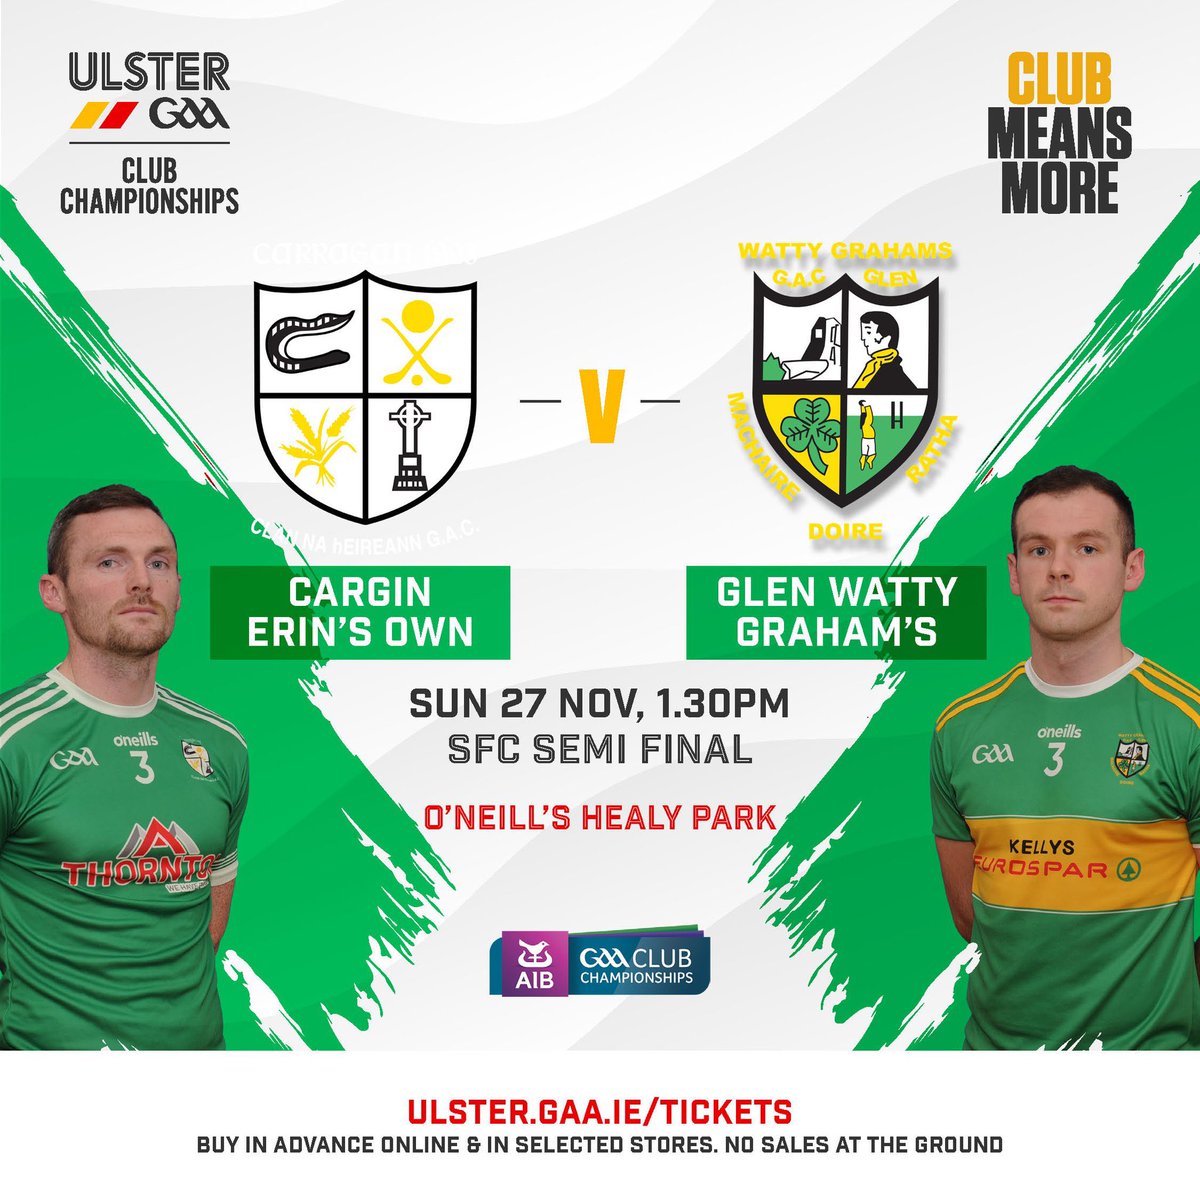 Two HUGE #UlsterClub2022 games tomorrow for our Antrim champions! @ShaneUiNeill v Setanta in the Junior Hurling Final 🏆 @Cargin_Gac v Glen in the Senior Football semi-final 🏐 (LIVE on TG4) Get you tickets here: ulster.gaa.ie/tickets/